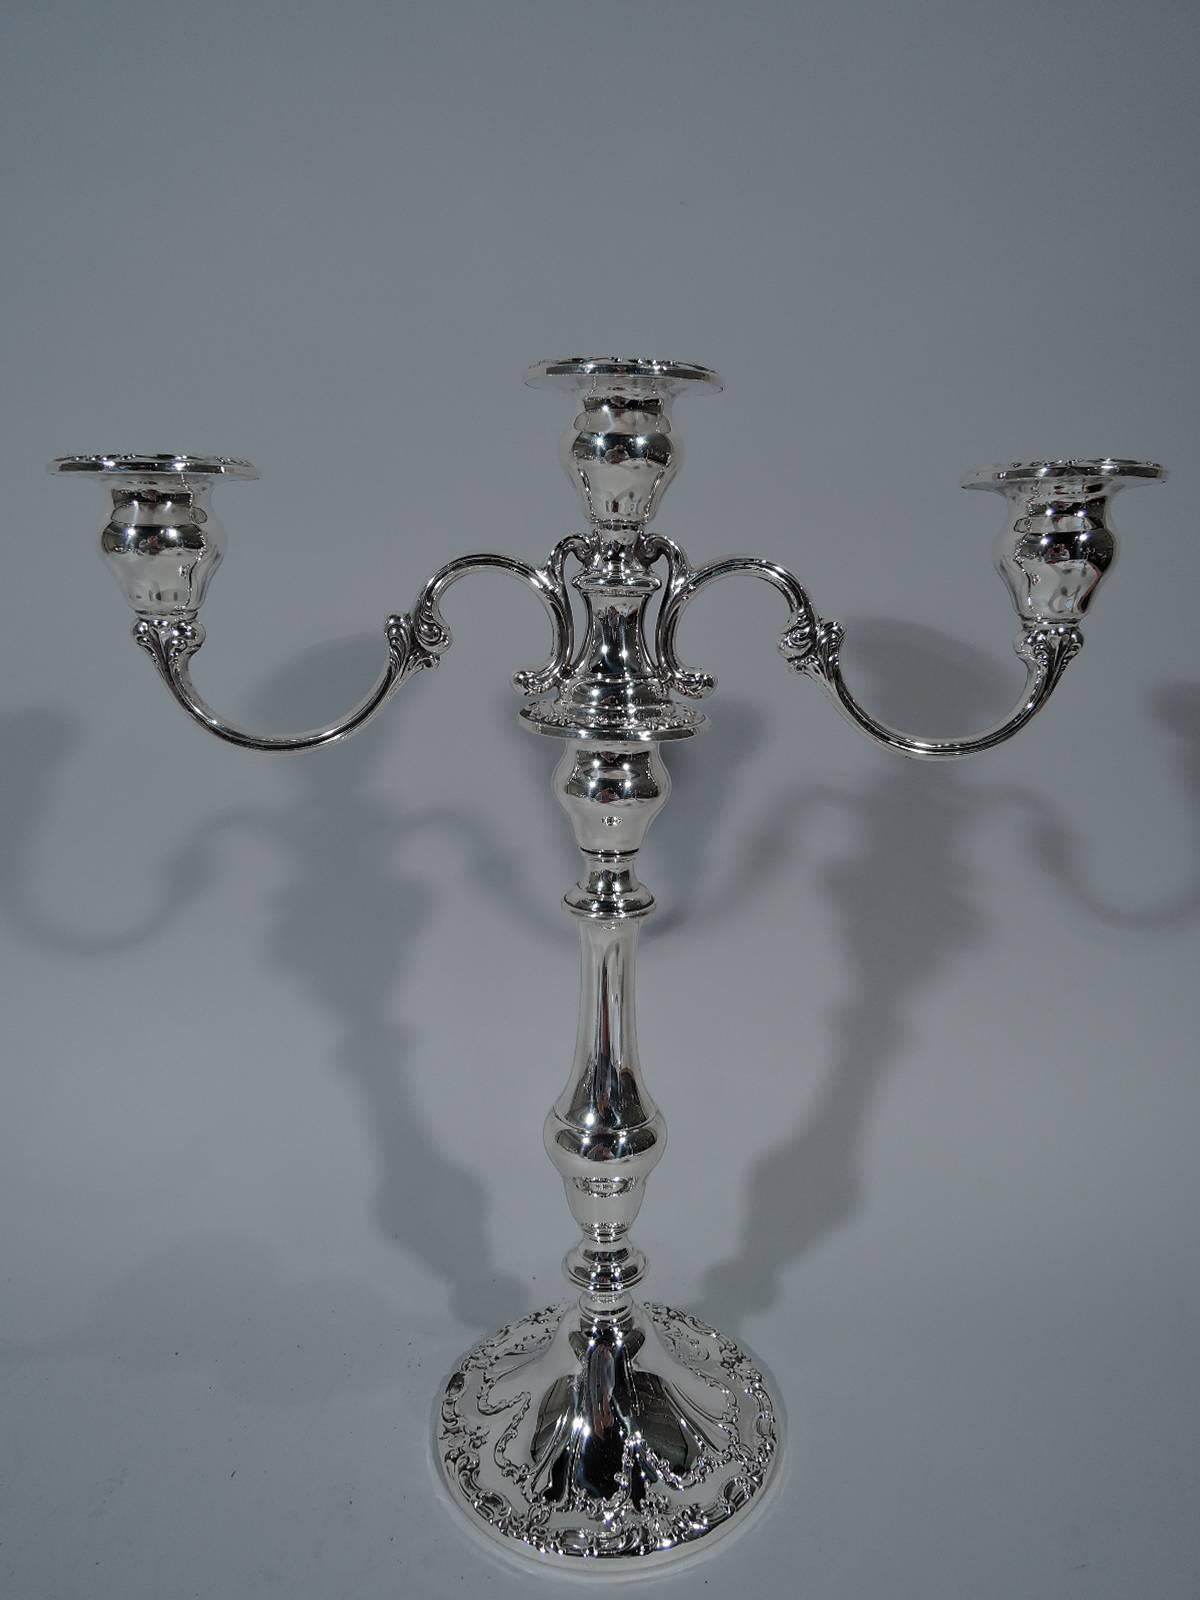 Pair of sterling silver three-light candelabra in Chantilly pattern. Made by Gorham in Providence. Each: Raised foot, baluster stem on knop, terminating in central socket mounted with two double-scroll arms, each terminating in single socket. Raised